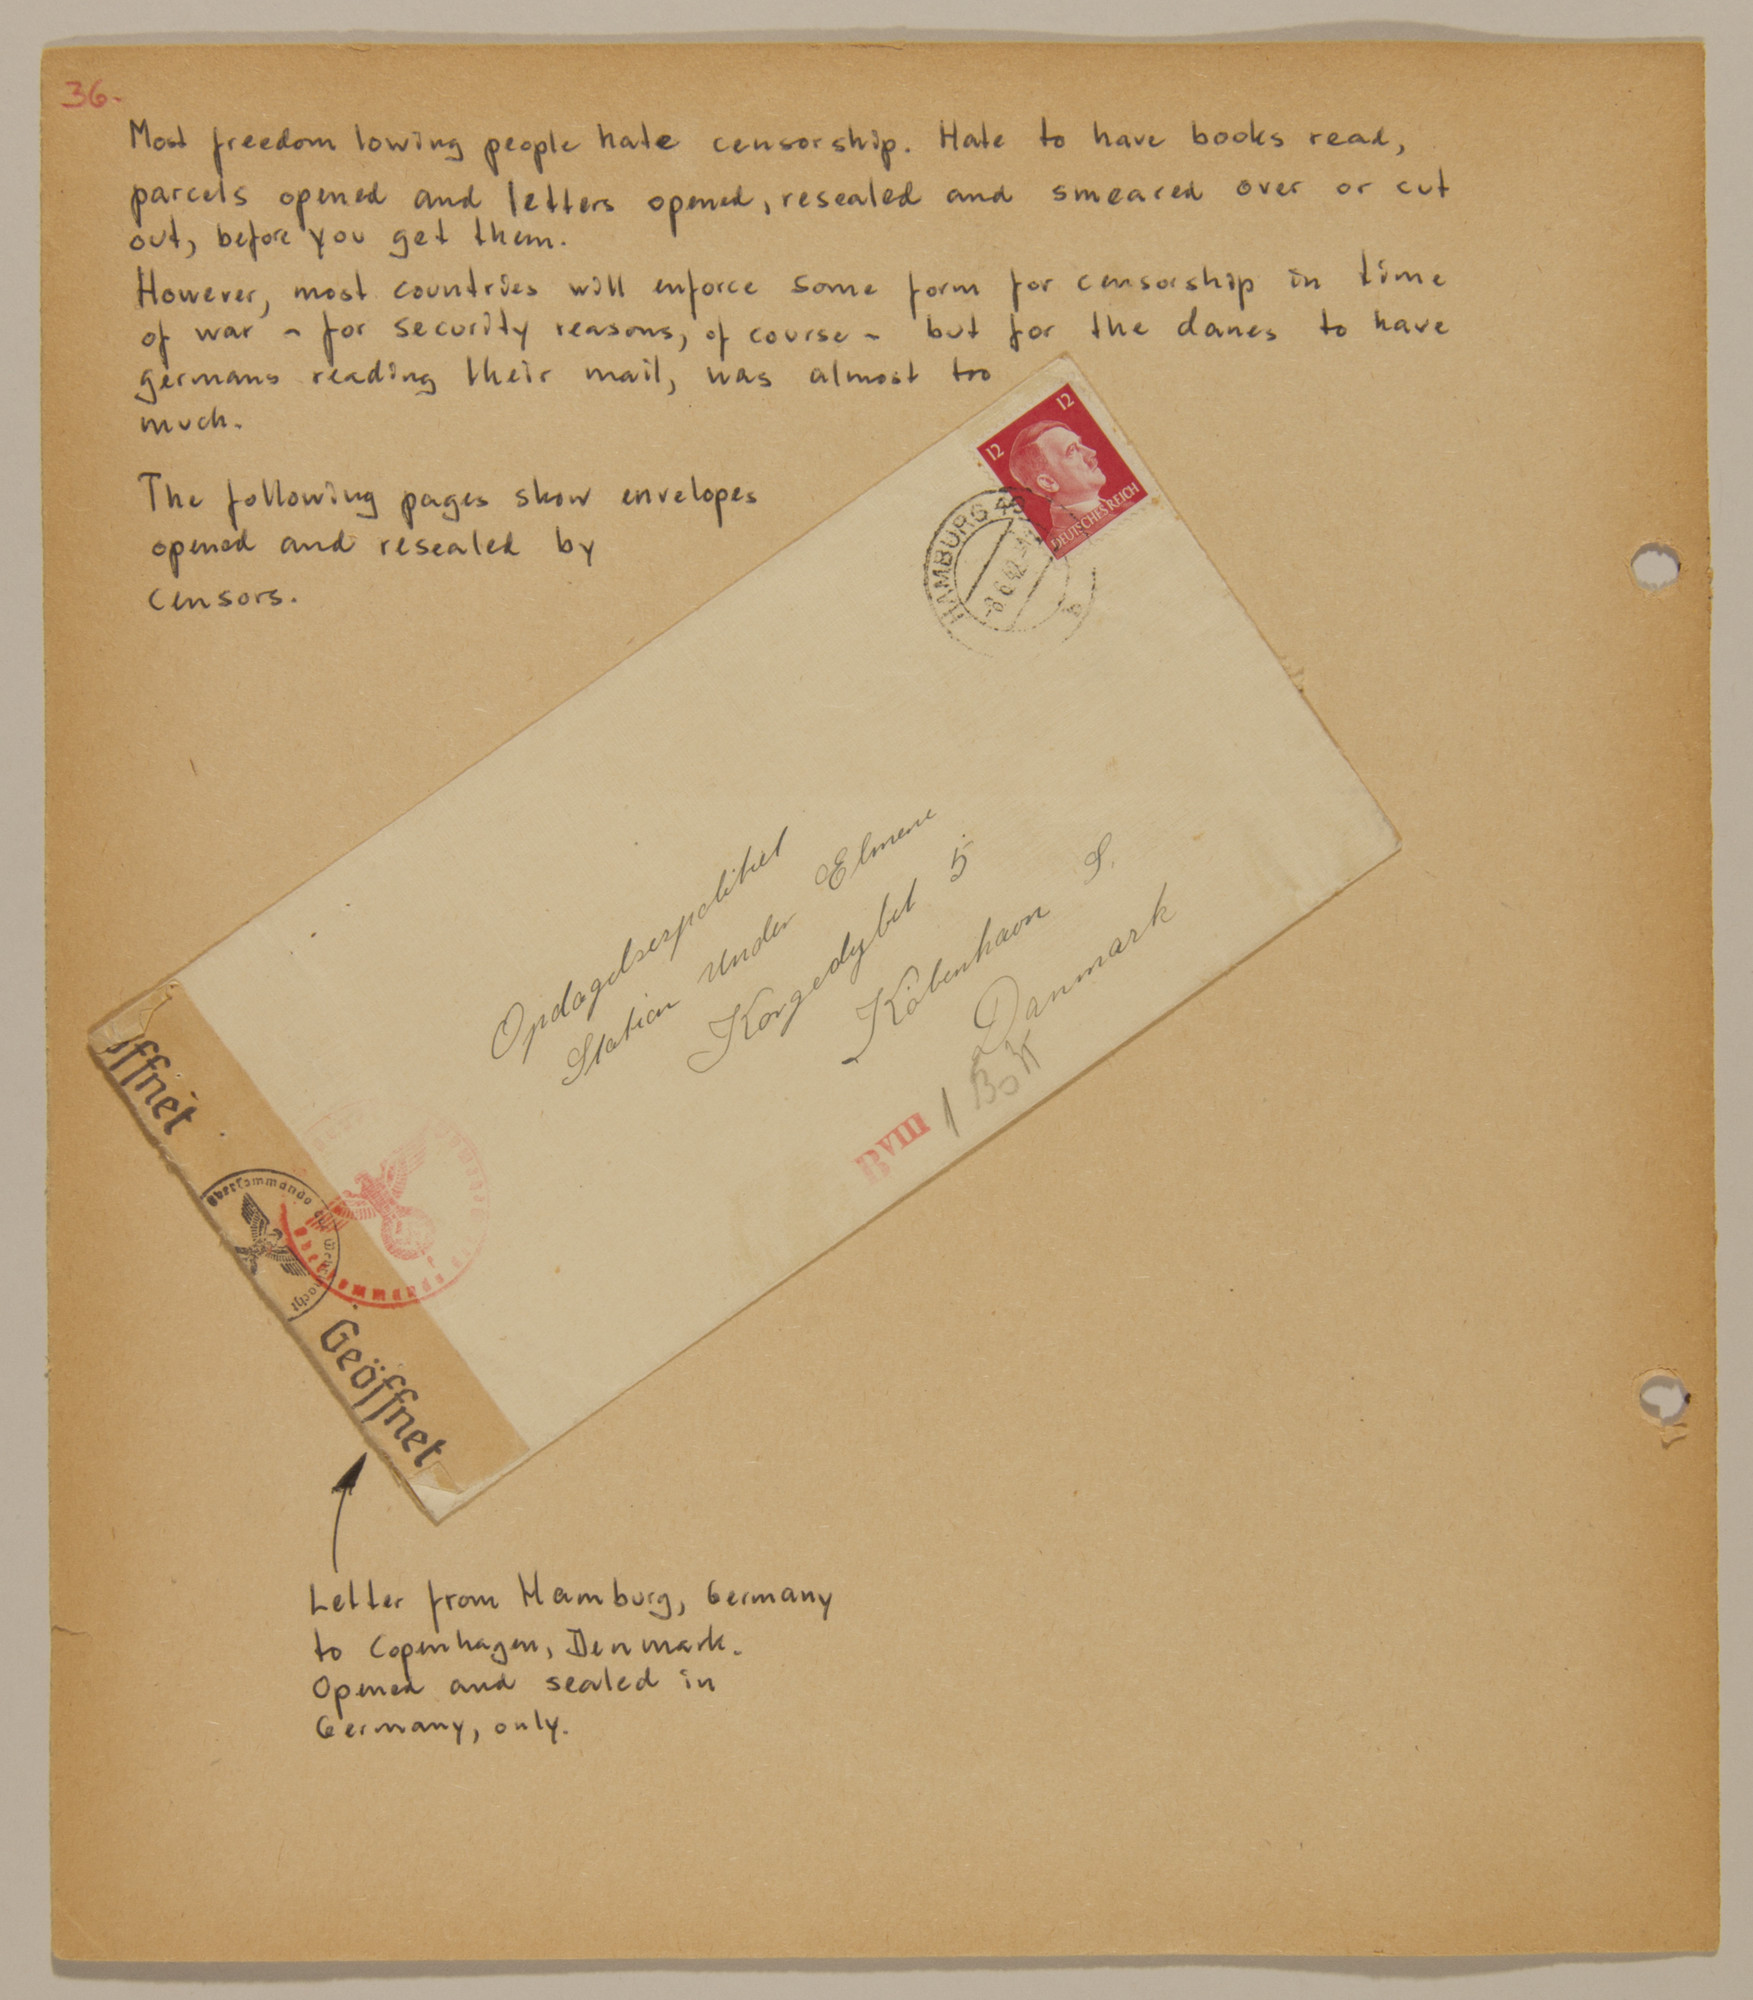 Page from volume four of a set of scrapbooks compiled by Bjorn Sibbern, a Danish policeman and resistance member, documenting the German occupation of Denmark.

This page contains a letter that was opened by German censors and resealed.